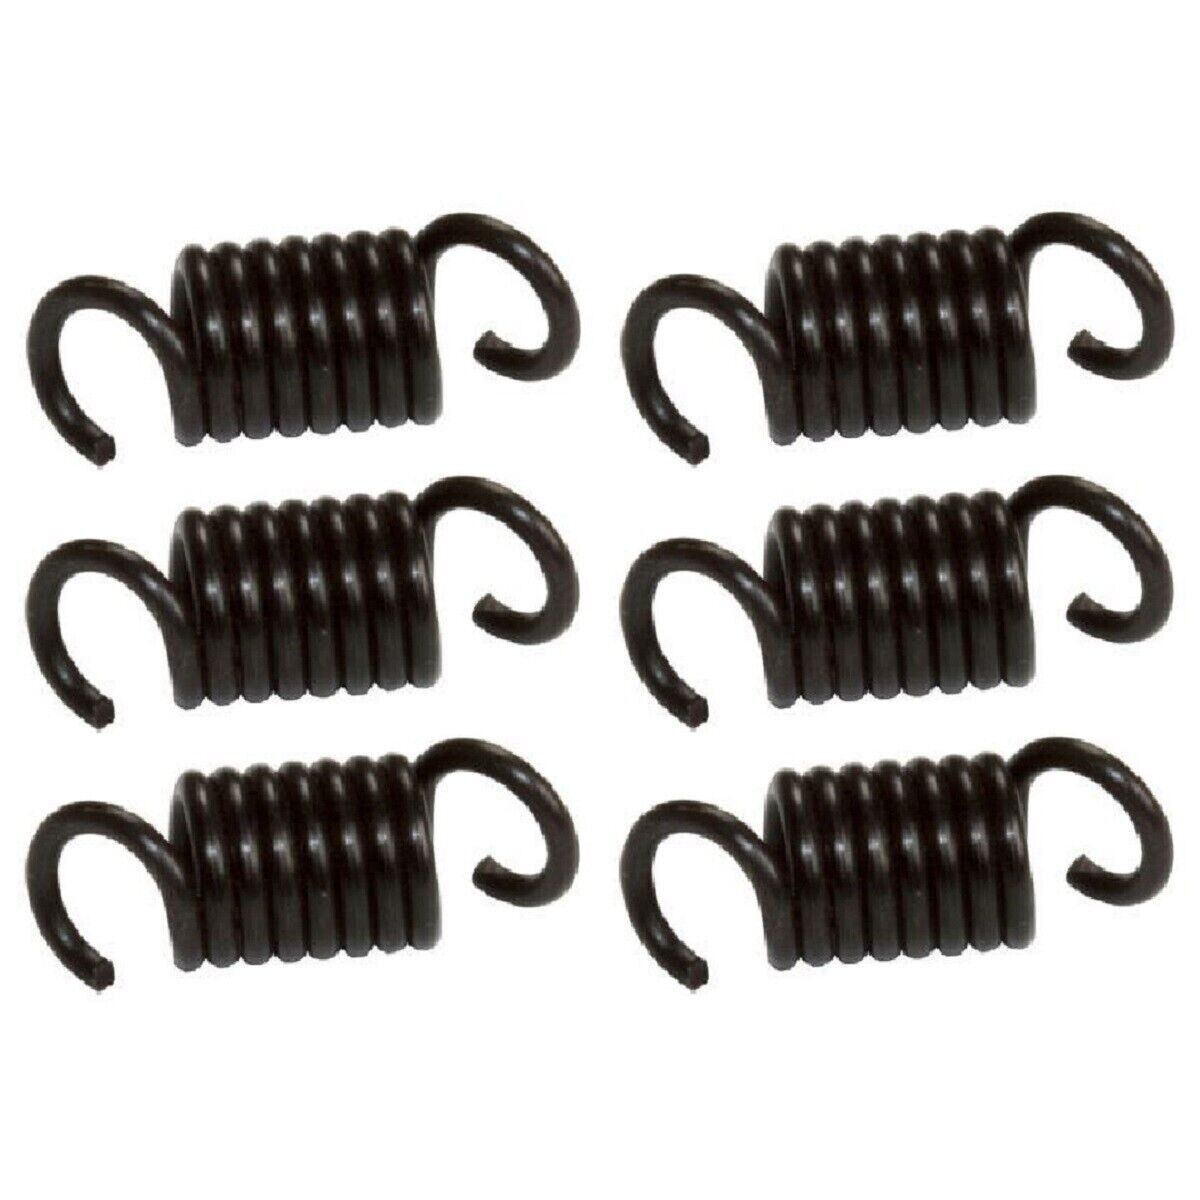 6 Clutch Springs fit Stihl 00009975815 TS400 036 044 046 MS341 MS360 MS361 MS440 - $22.12